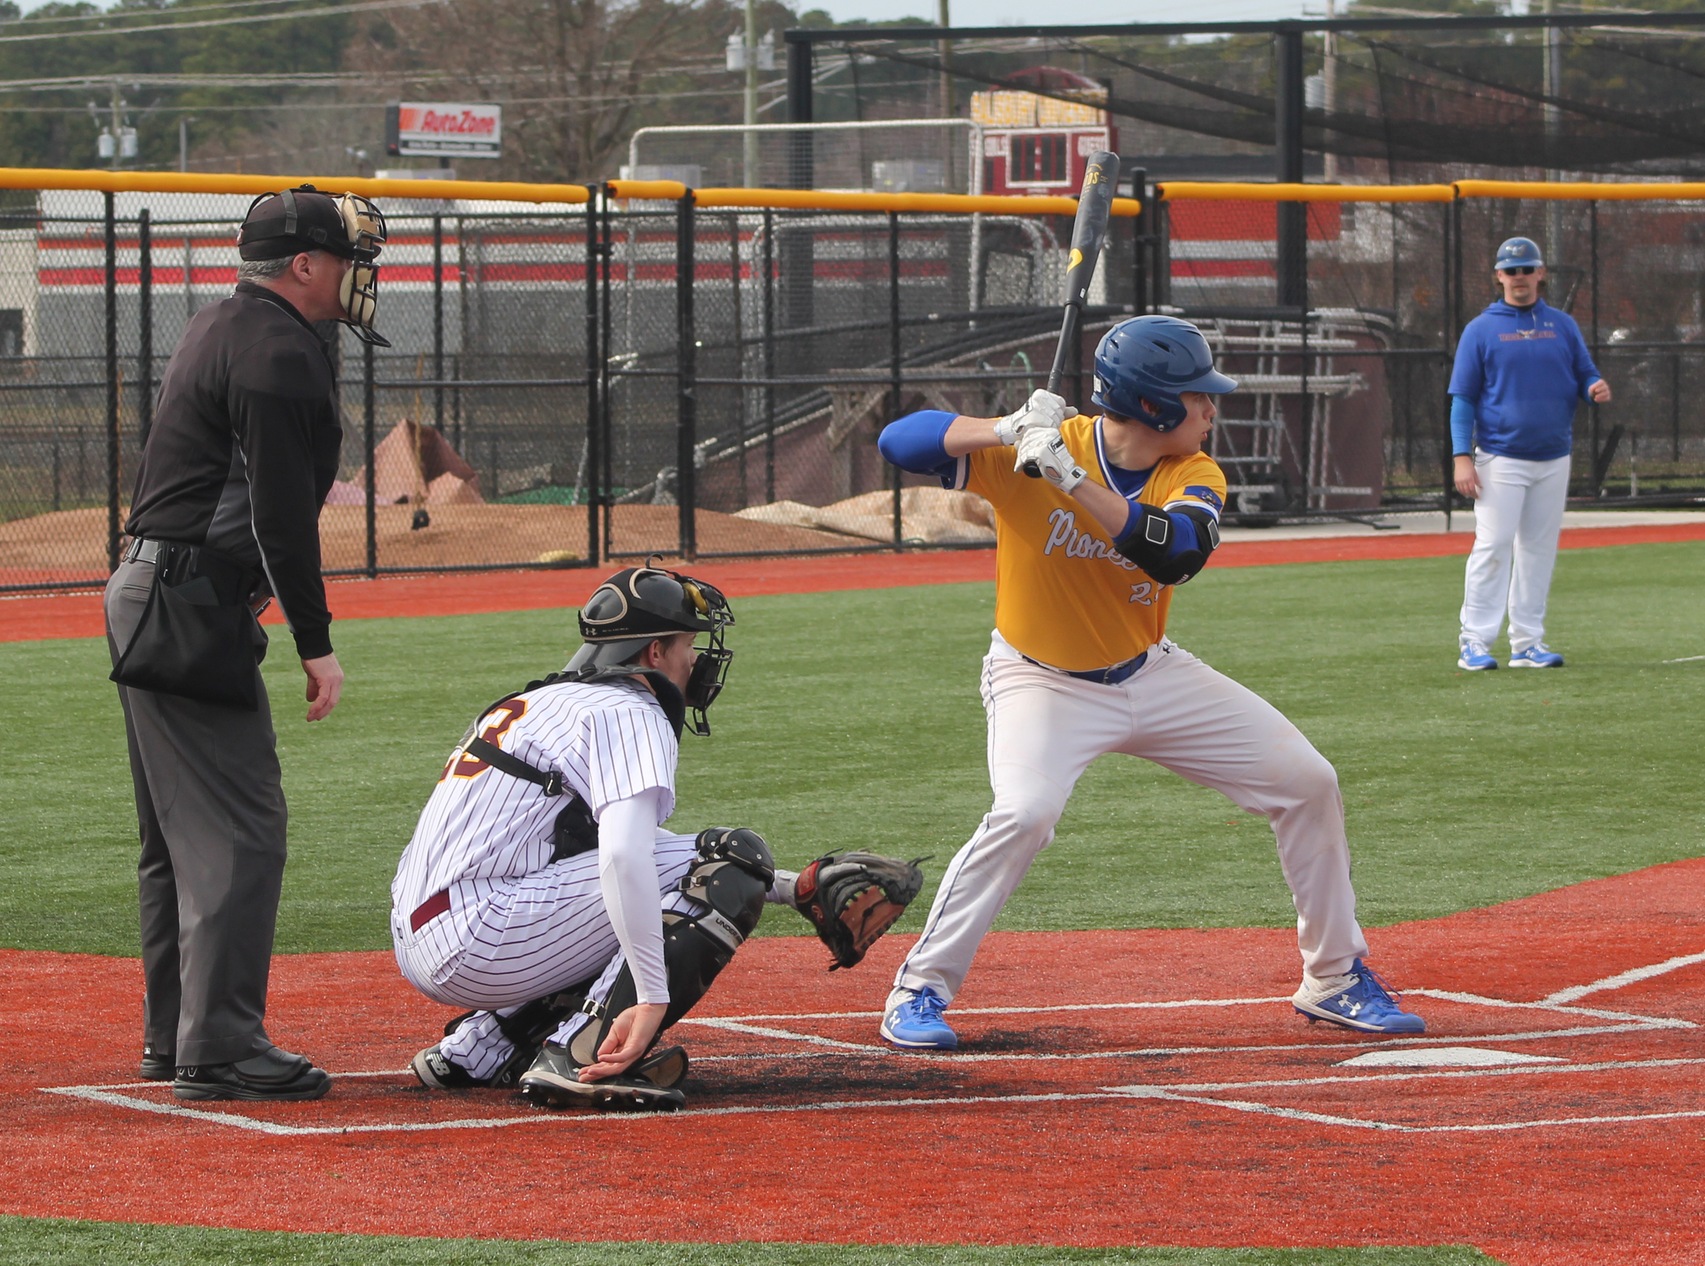 Matteo Avallone at the plate